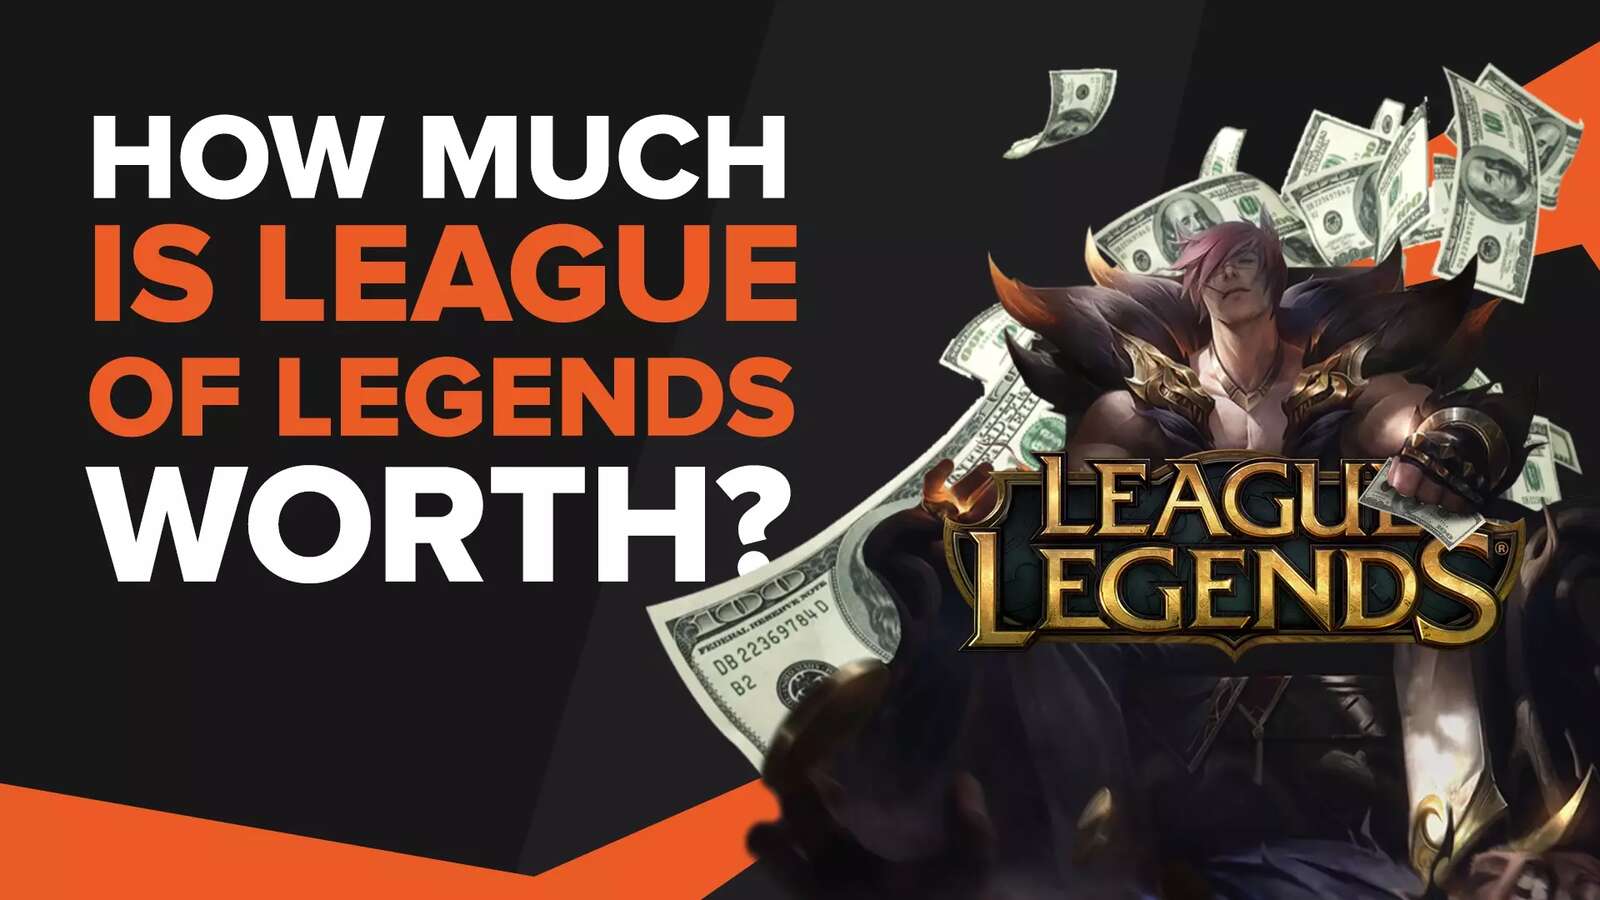 Discover How Much is League of Legends Worth